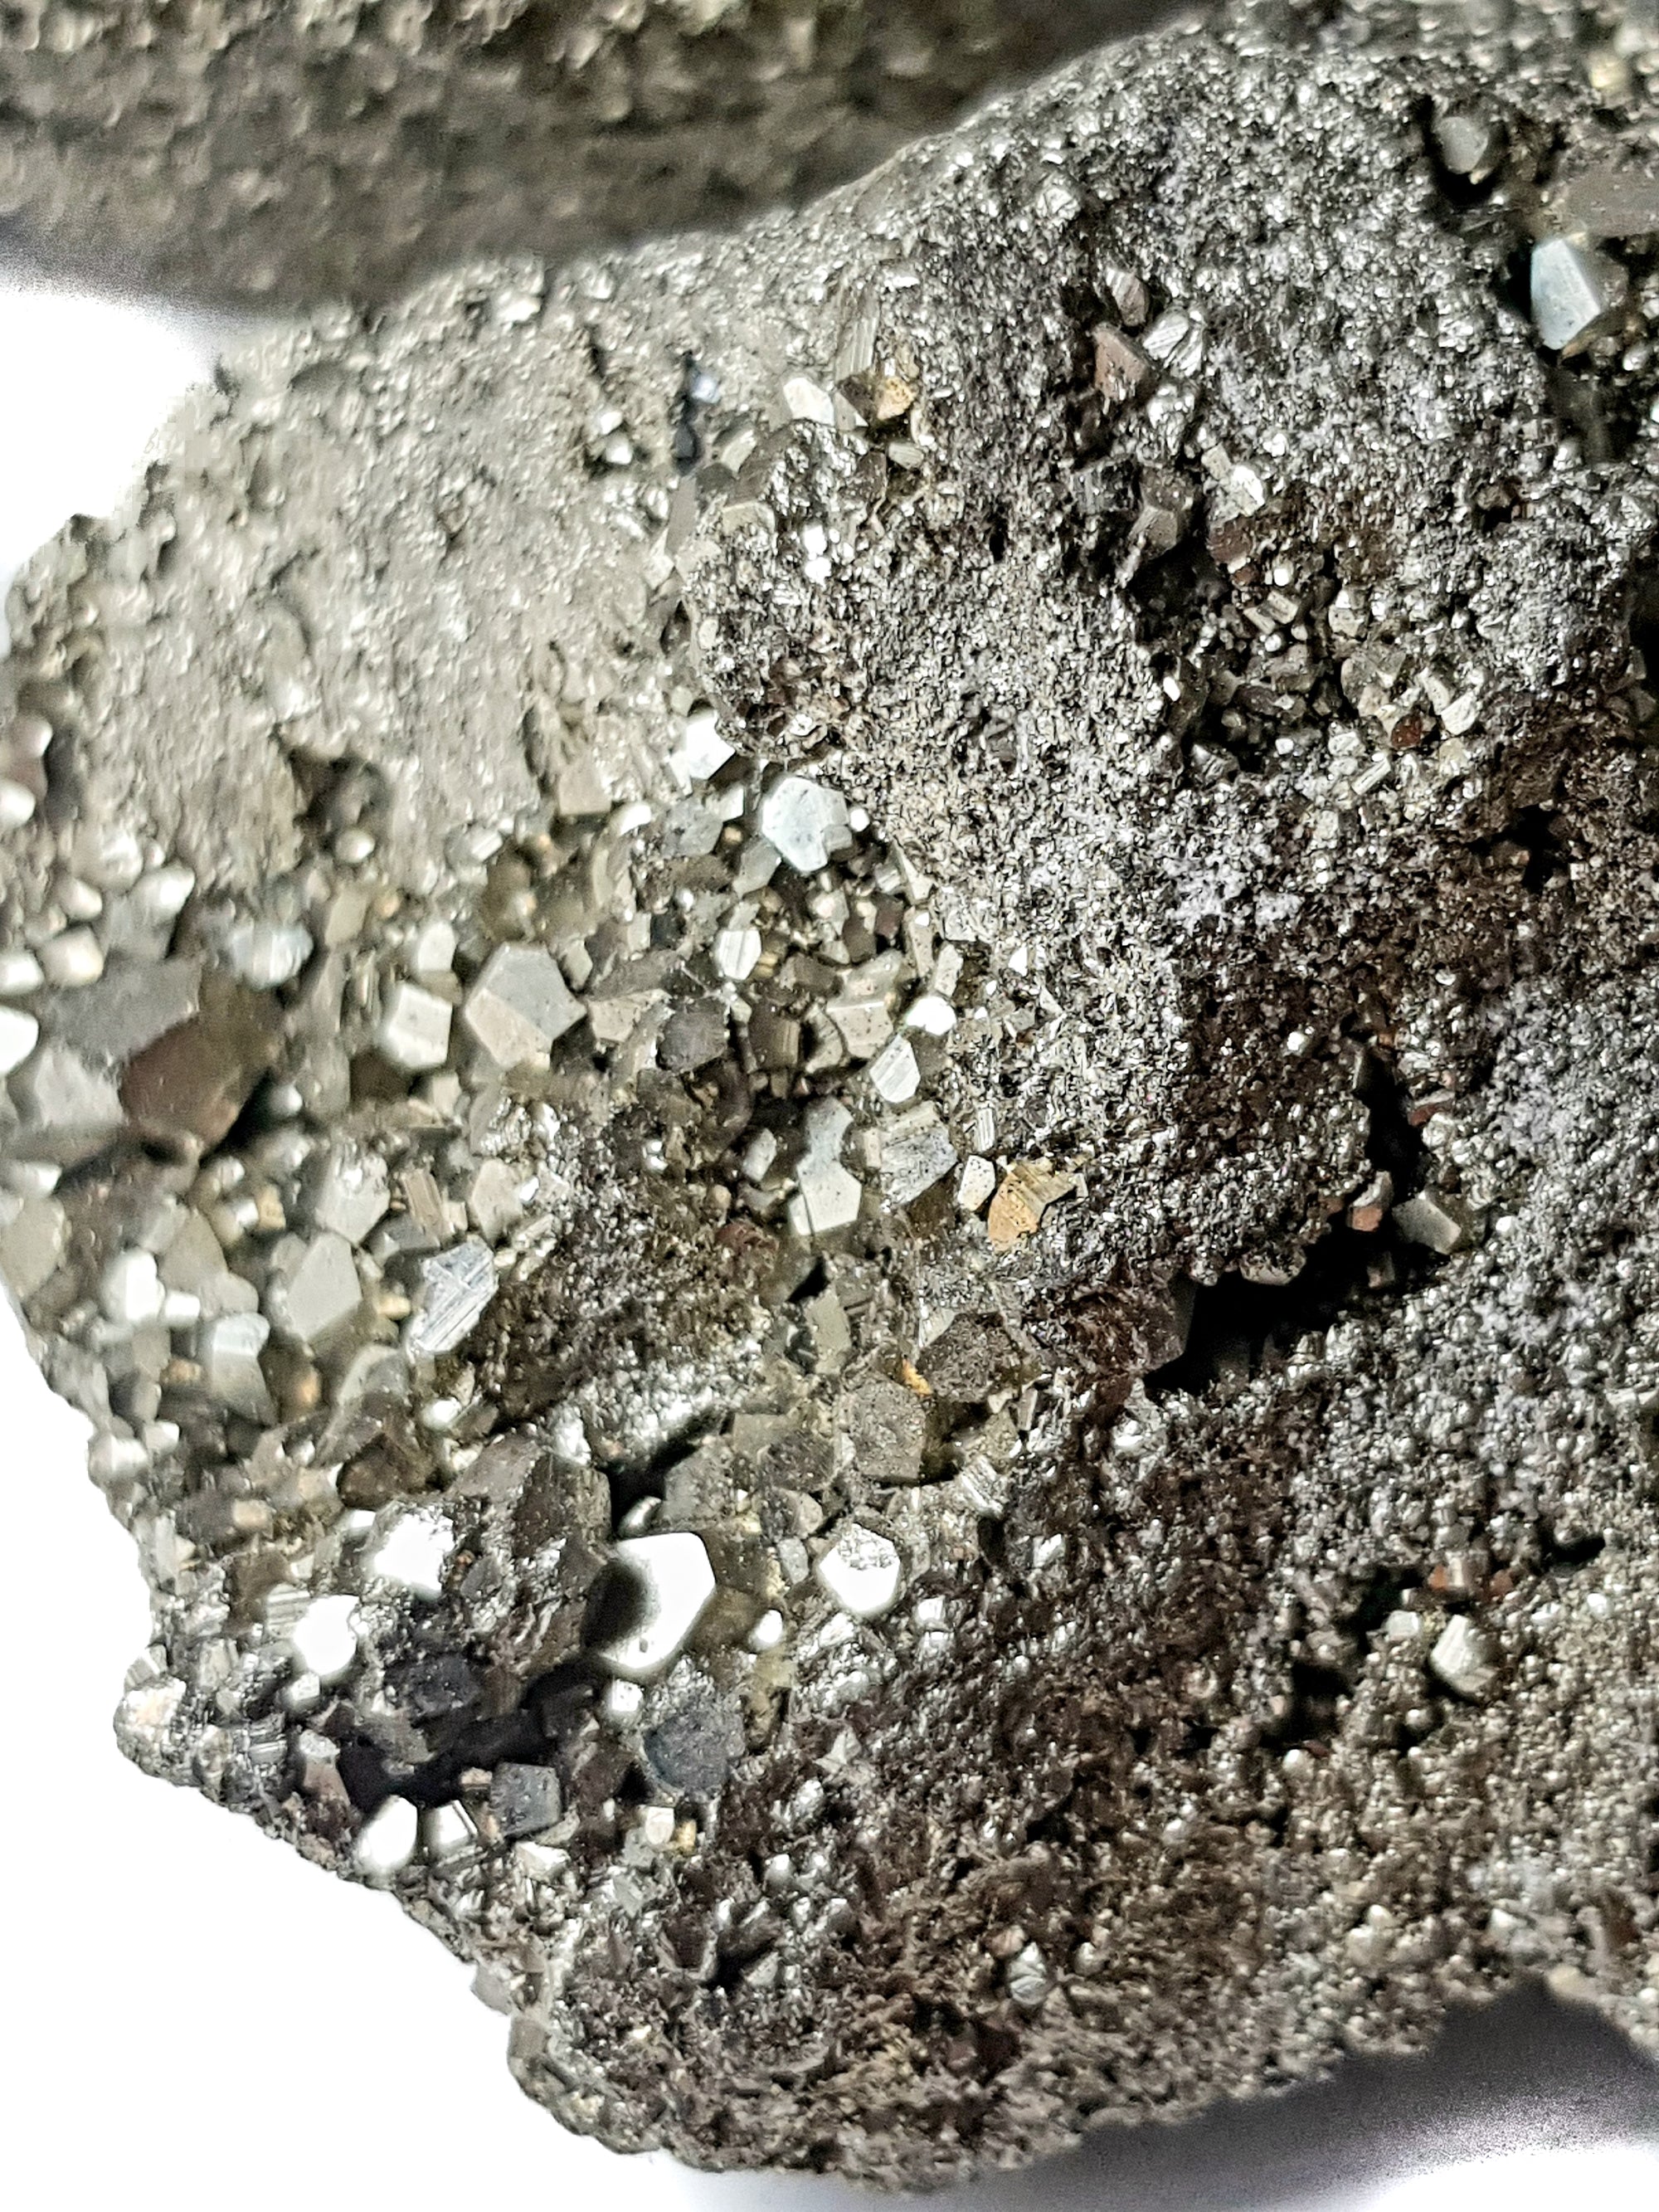 A close up of a chunk of pyrite showing multiple dodecahedral crystals